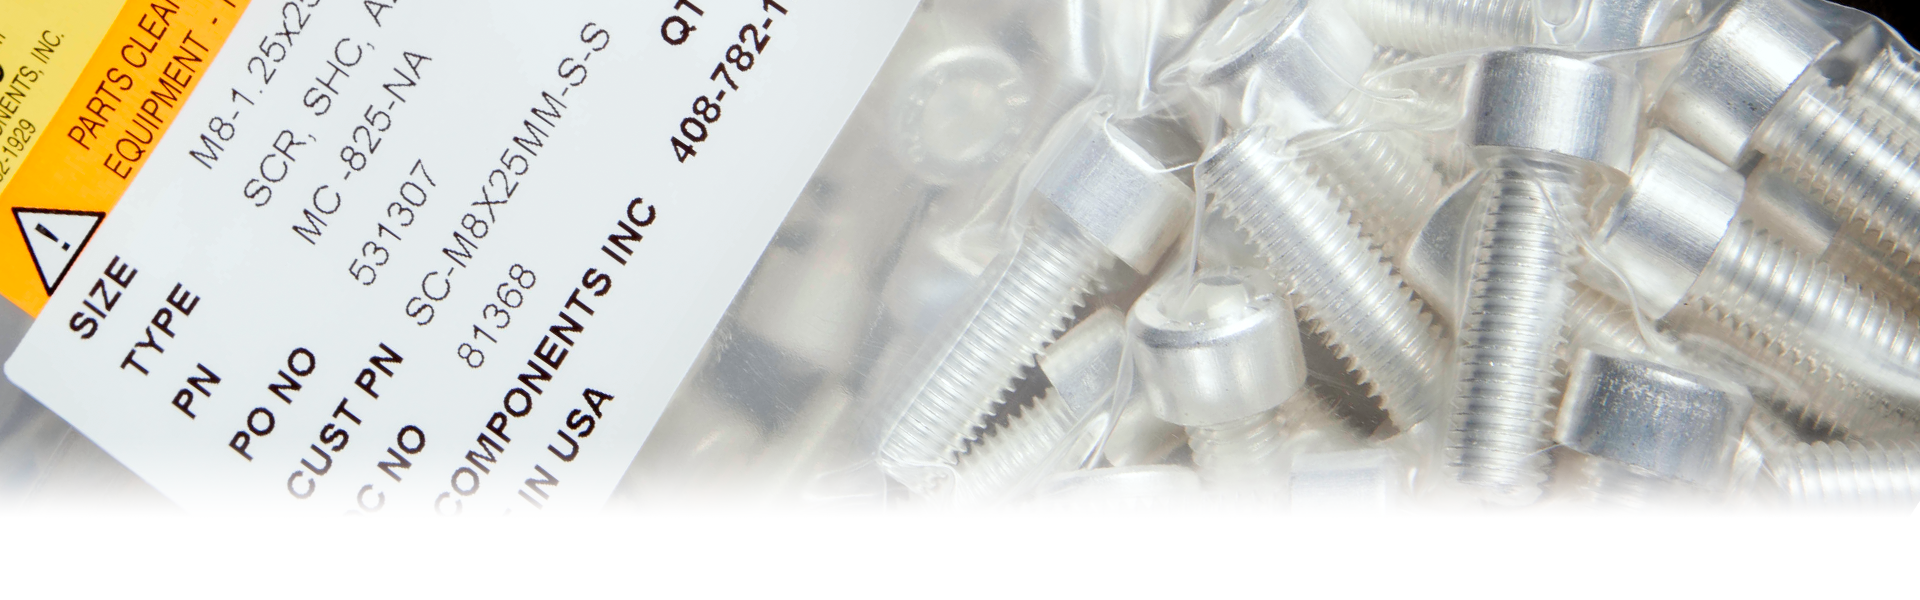 RediVac® Finish Options such as Silver plated screws